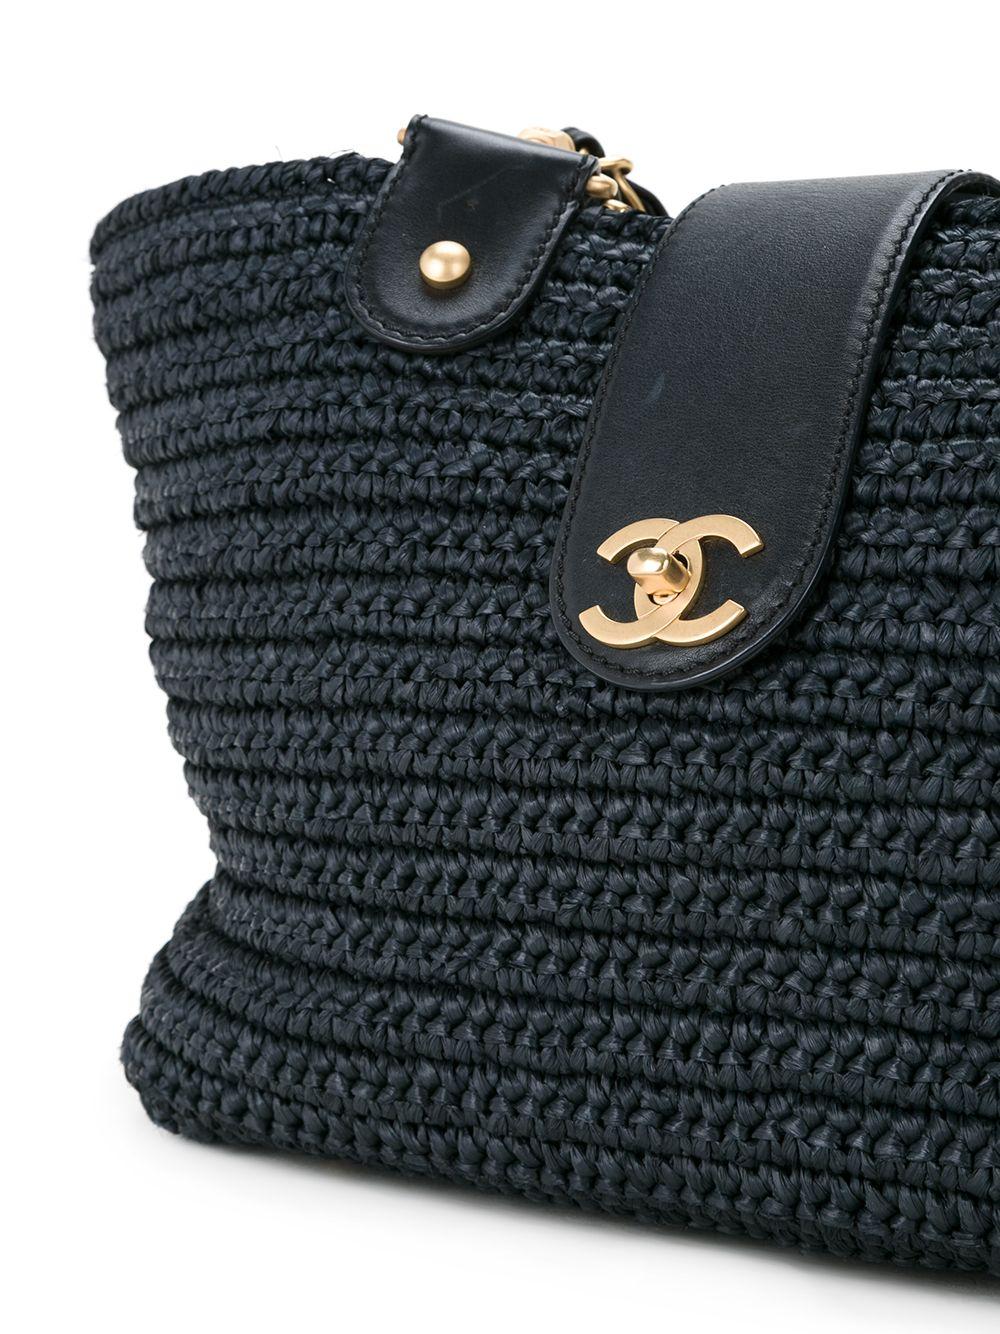 Women's or Men's Chanel 2005 Rare Vintage Raffia Woven Black Straw and Leather Basket Tote For Sale